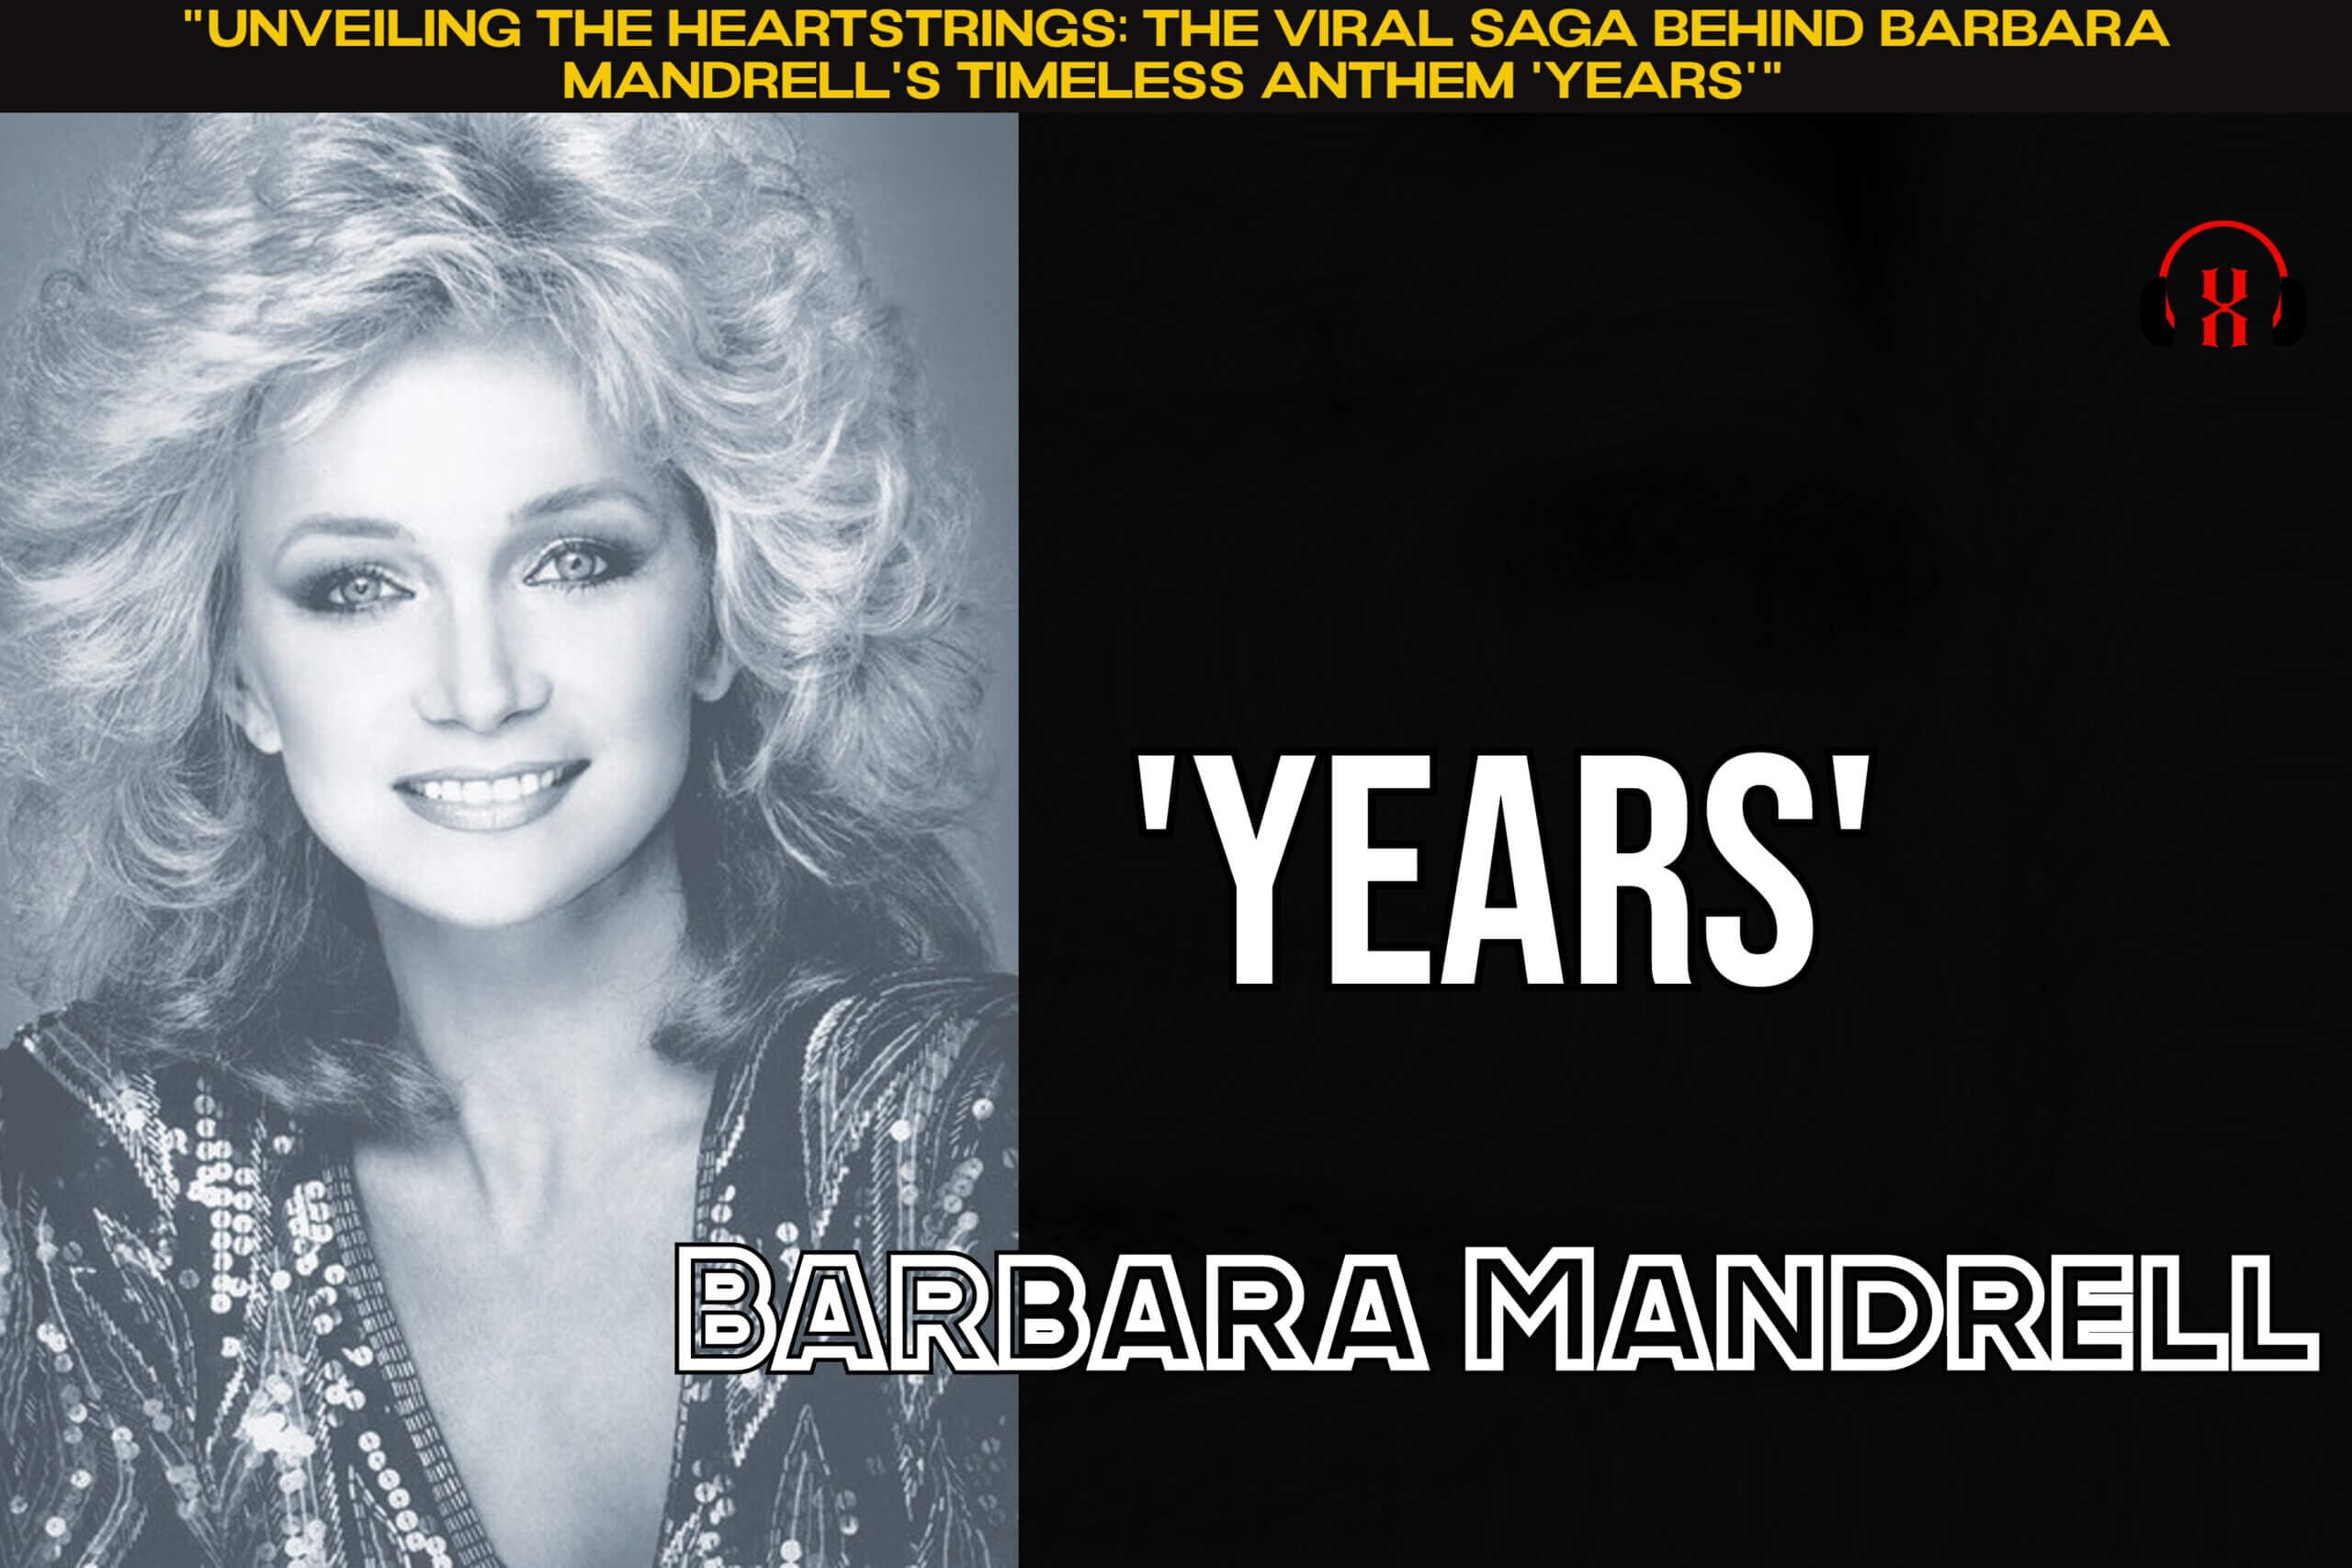 “Unveiling the Heartstrings: The Viral Saga Behind Barbara Mandrell’s Timeless Anthem ‘Years'”